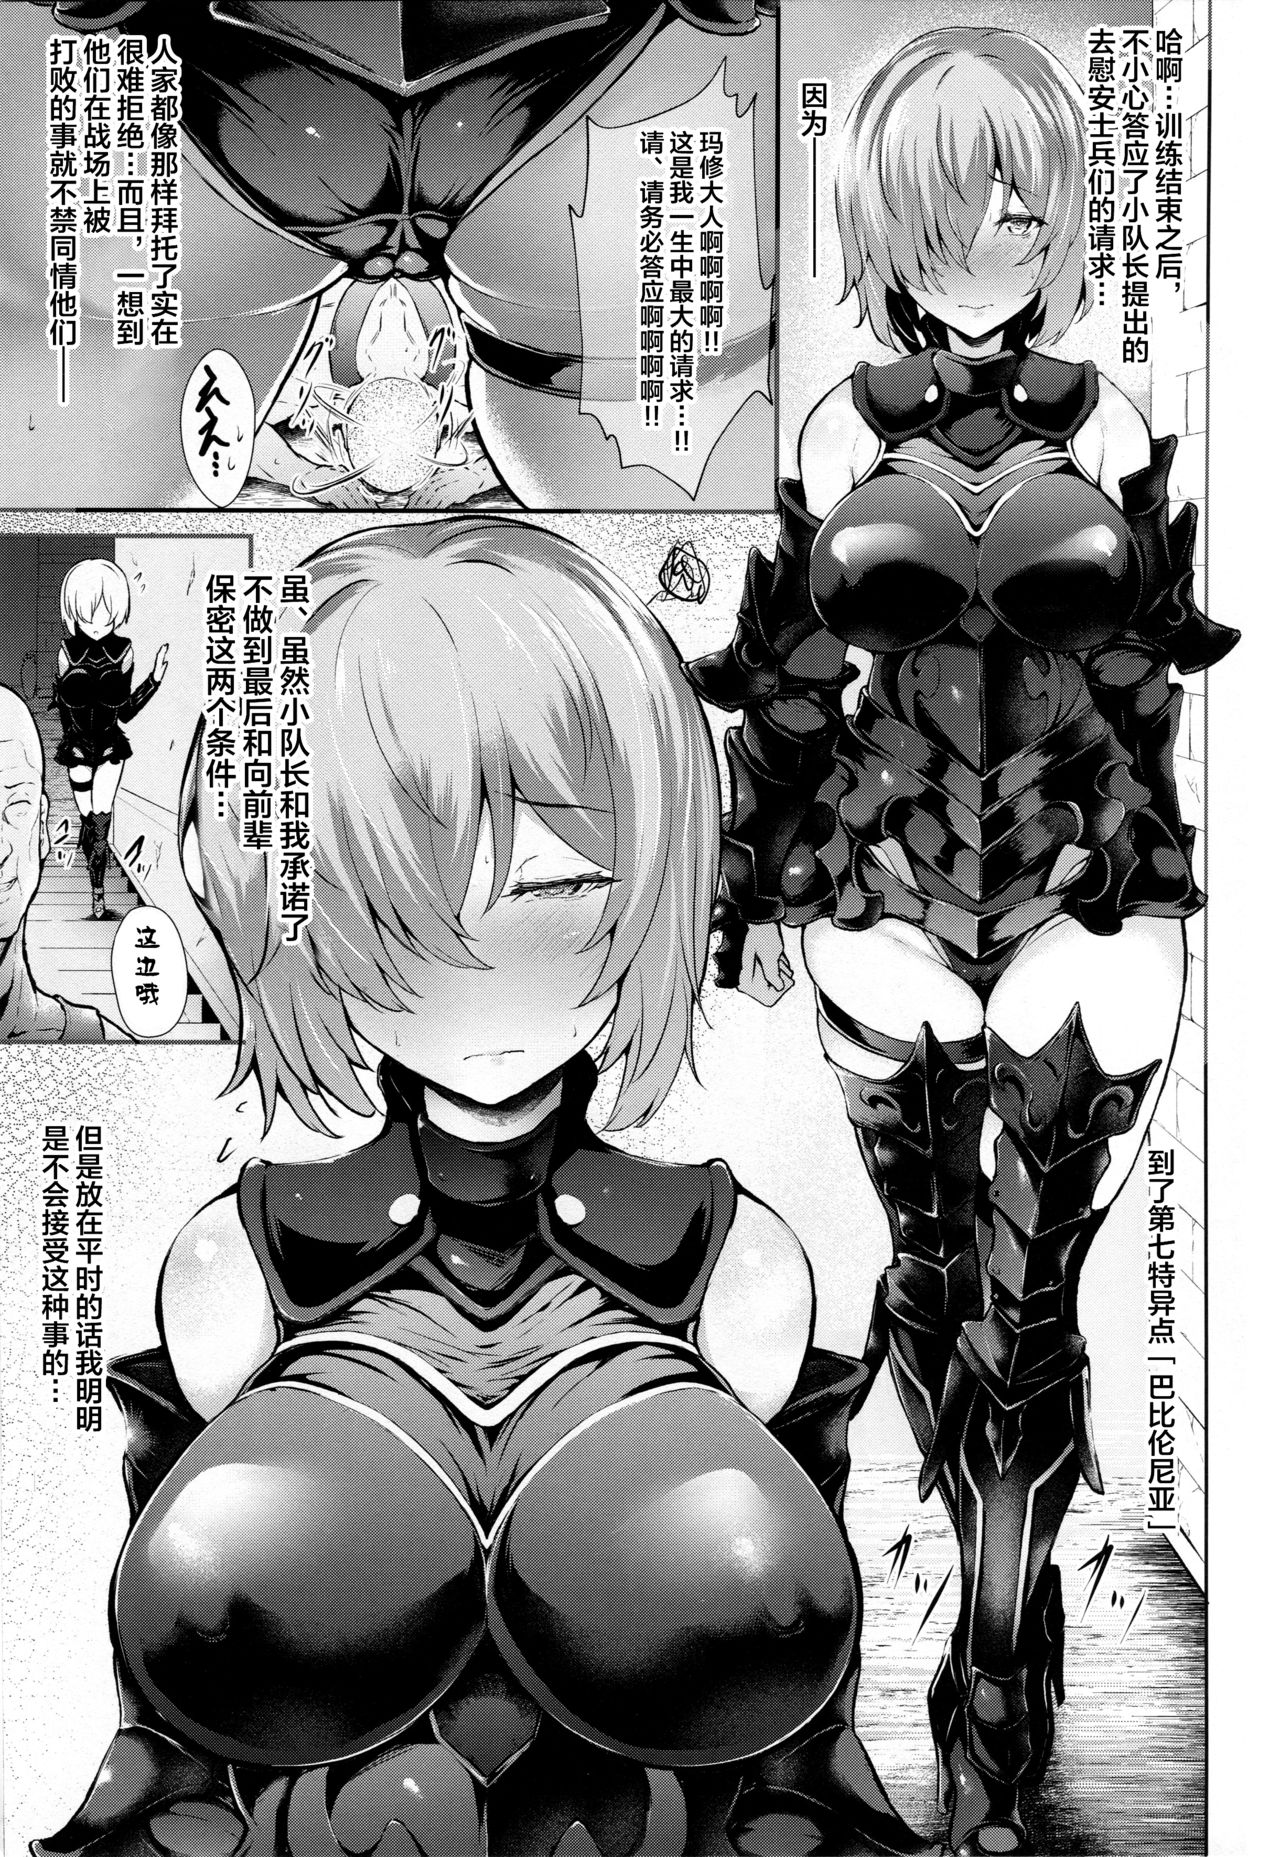 (C94) [Frank Factory (Lorica)] Nympho-mania? (Fate/Grand Order) [Chinese] [不咕鸟汉化组] (C94) [Frank Factory (Lorica)] Nympho-mania? (Fate/Grand Order) [中国翻訳]